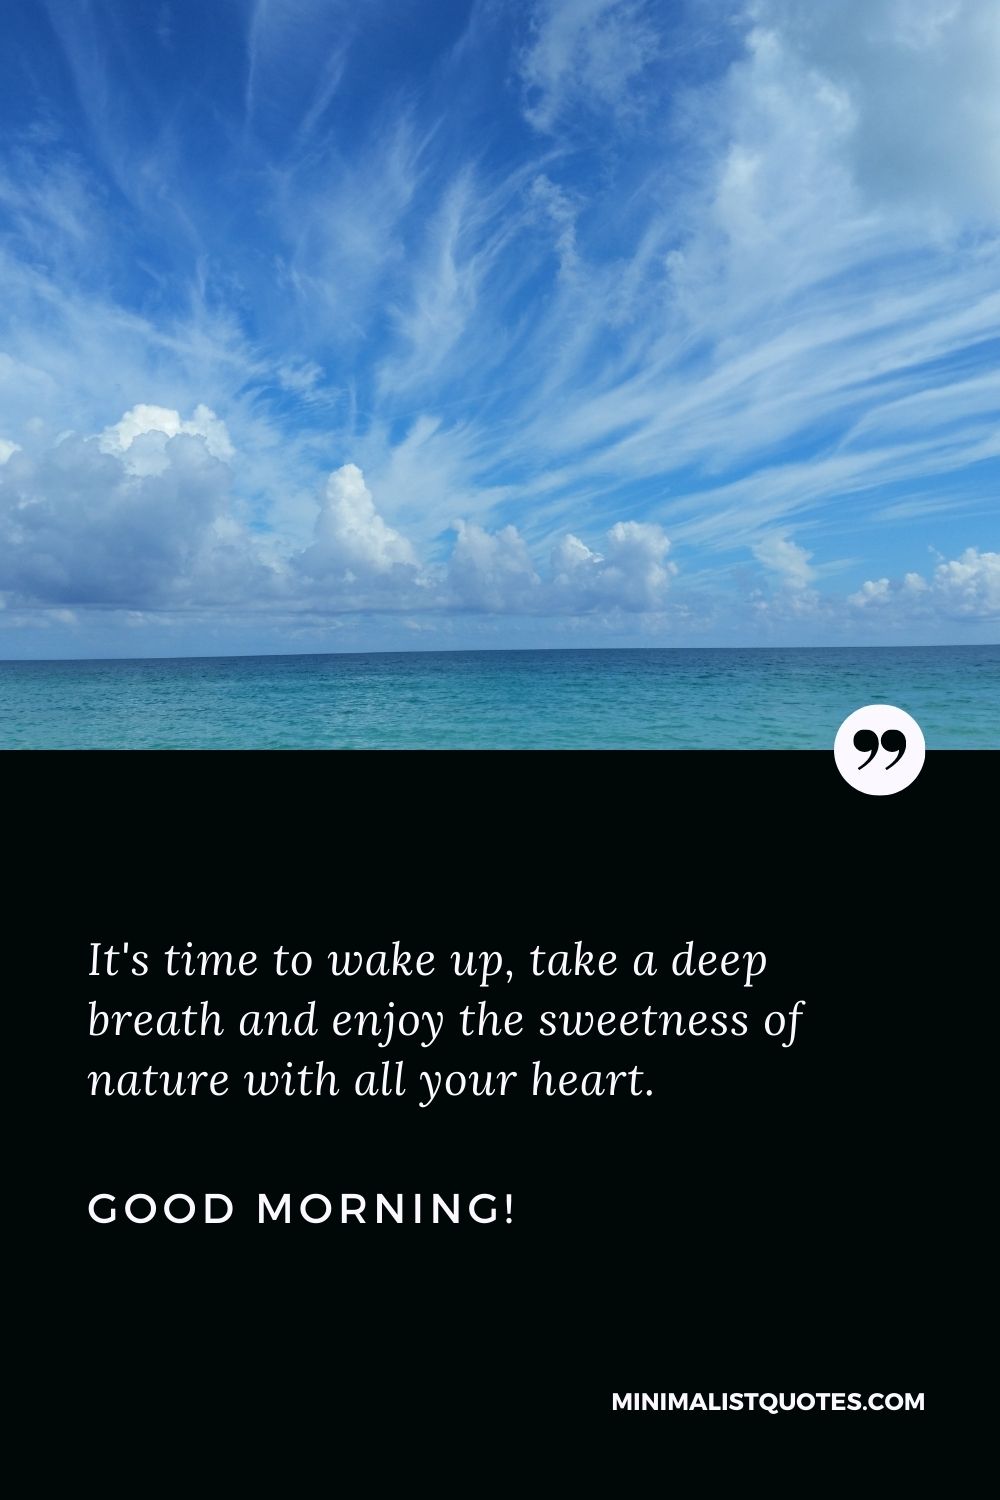 Inspirational good morning message for him: It's time to wake up, take a deep breath and enjoy the sweetness of nature with all your heart. Good Morning!